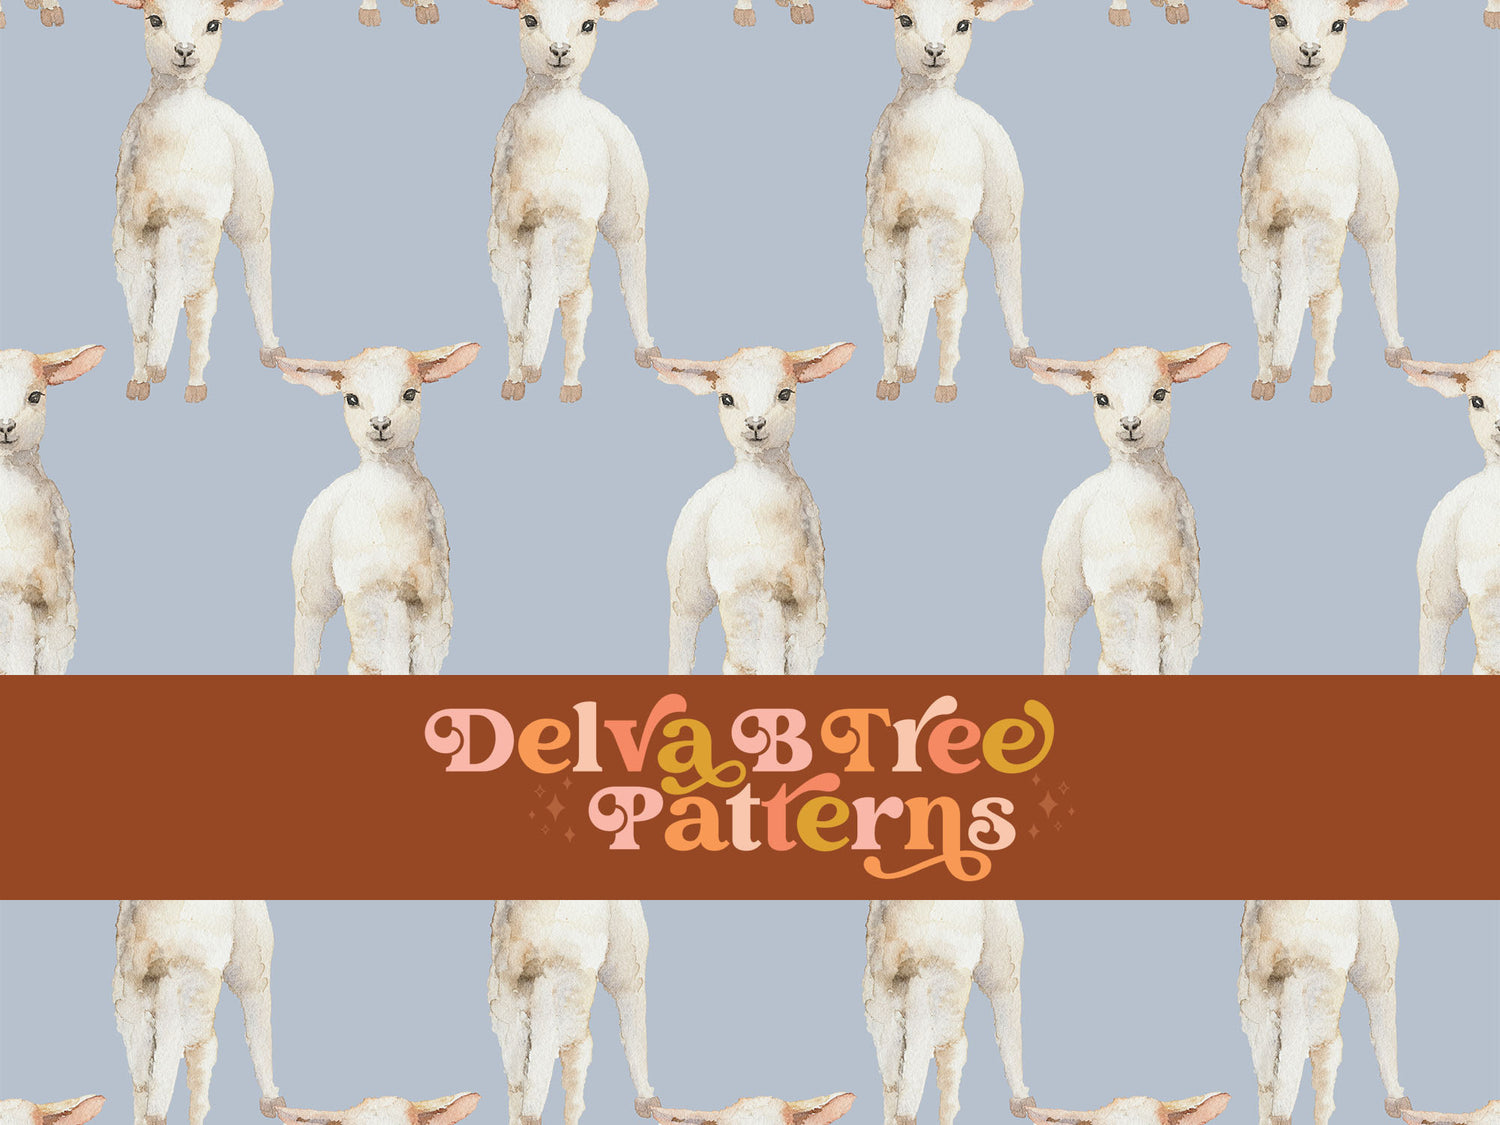 Watercolor lambs on a pastel blue background seamless file for fabric printing. Retro look Baby Sheep Repeat Pattern for textiles, polymailers, baby boy lovey blankets, nursery crib bedding, kids clothing, girls hair accessories, home decor accents, pet products.